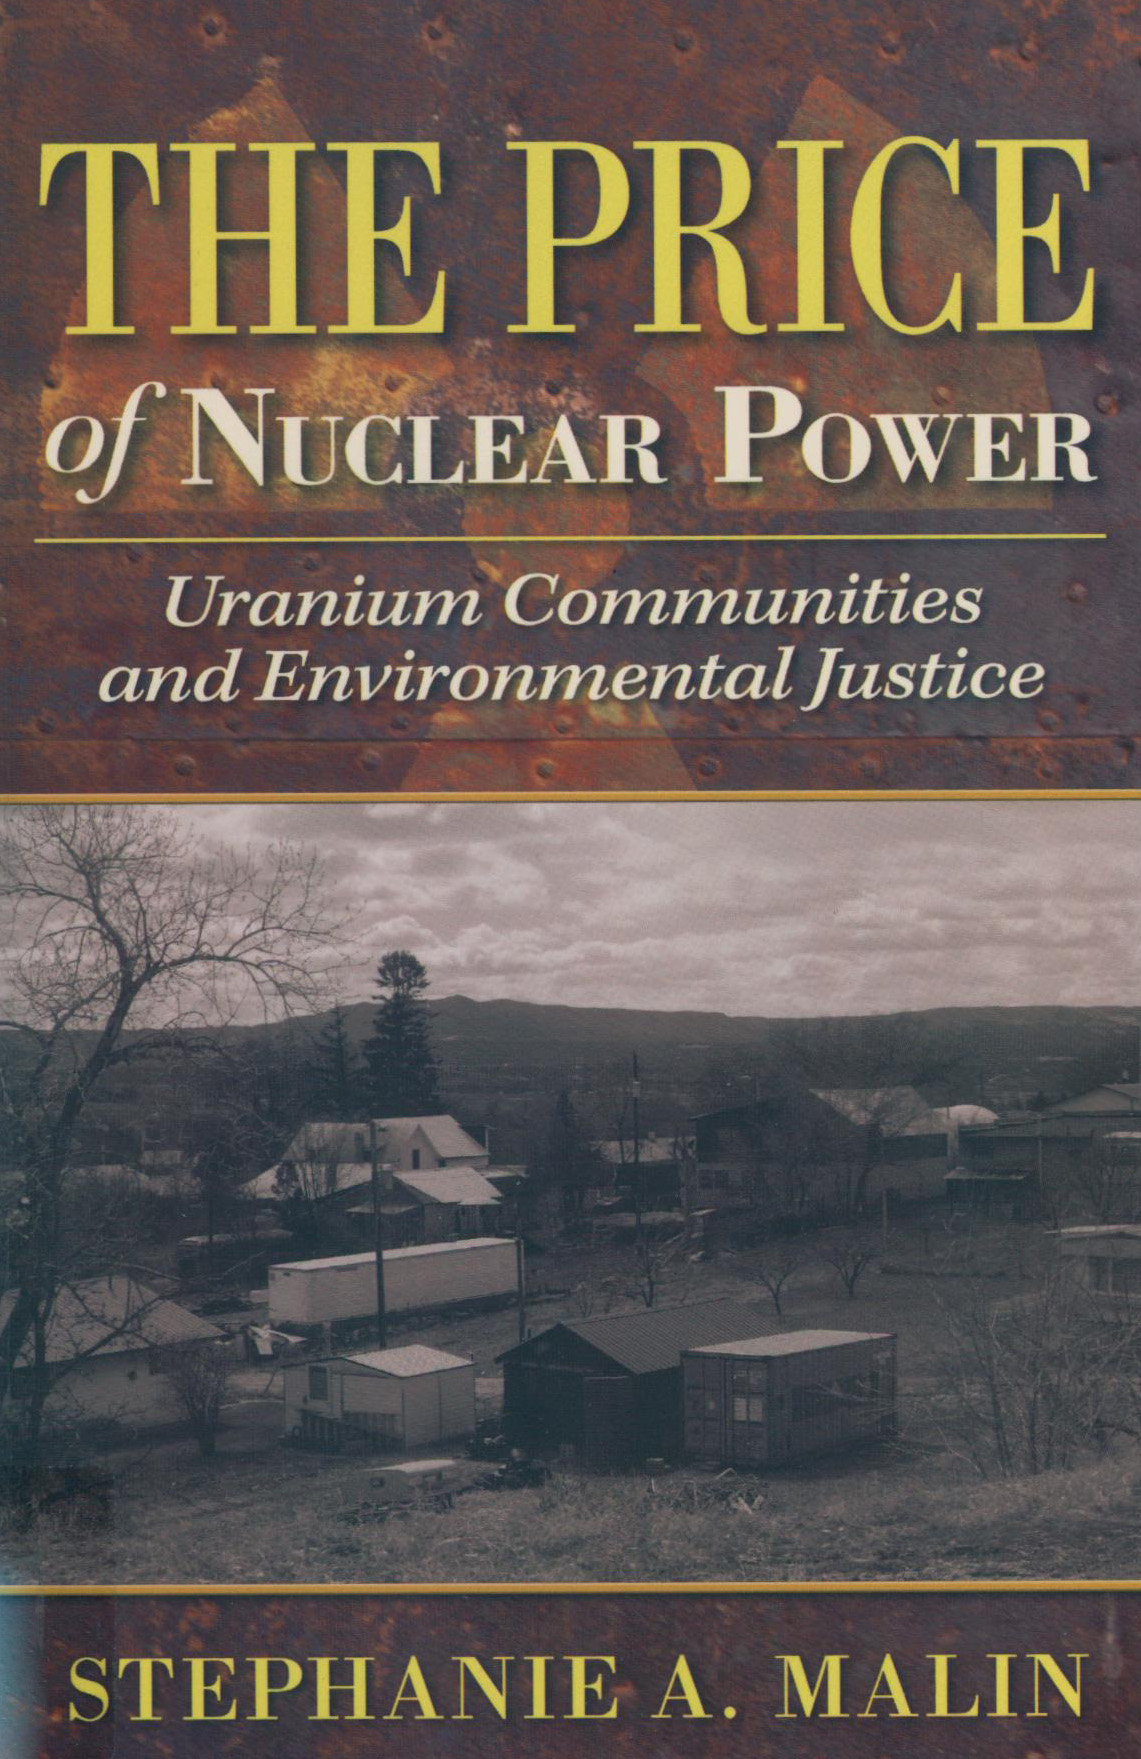 Price of Nuclear Power: Uranium Communities and Environmental Justice